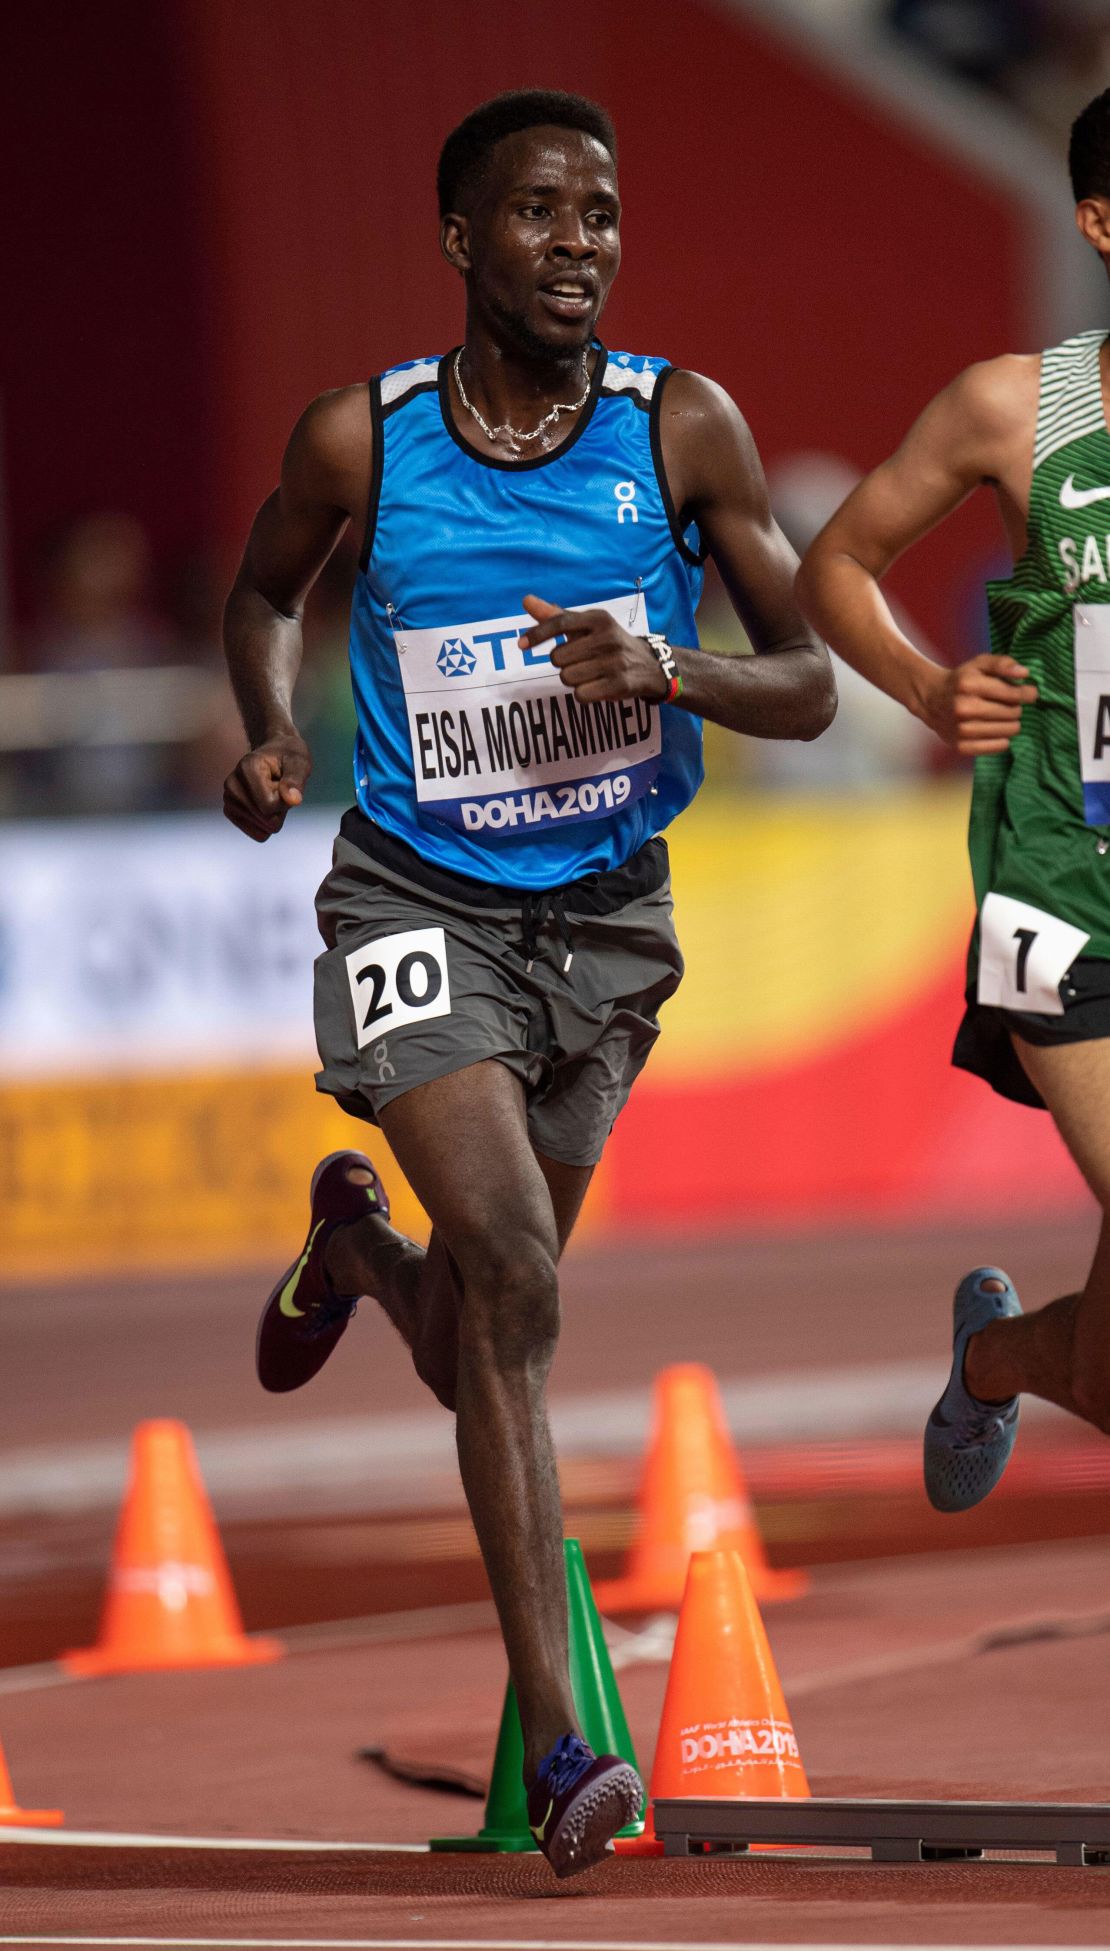 Mohammed competes in the men's 5,000-meter heats at the 2019 World Athletics Championship.